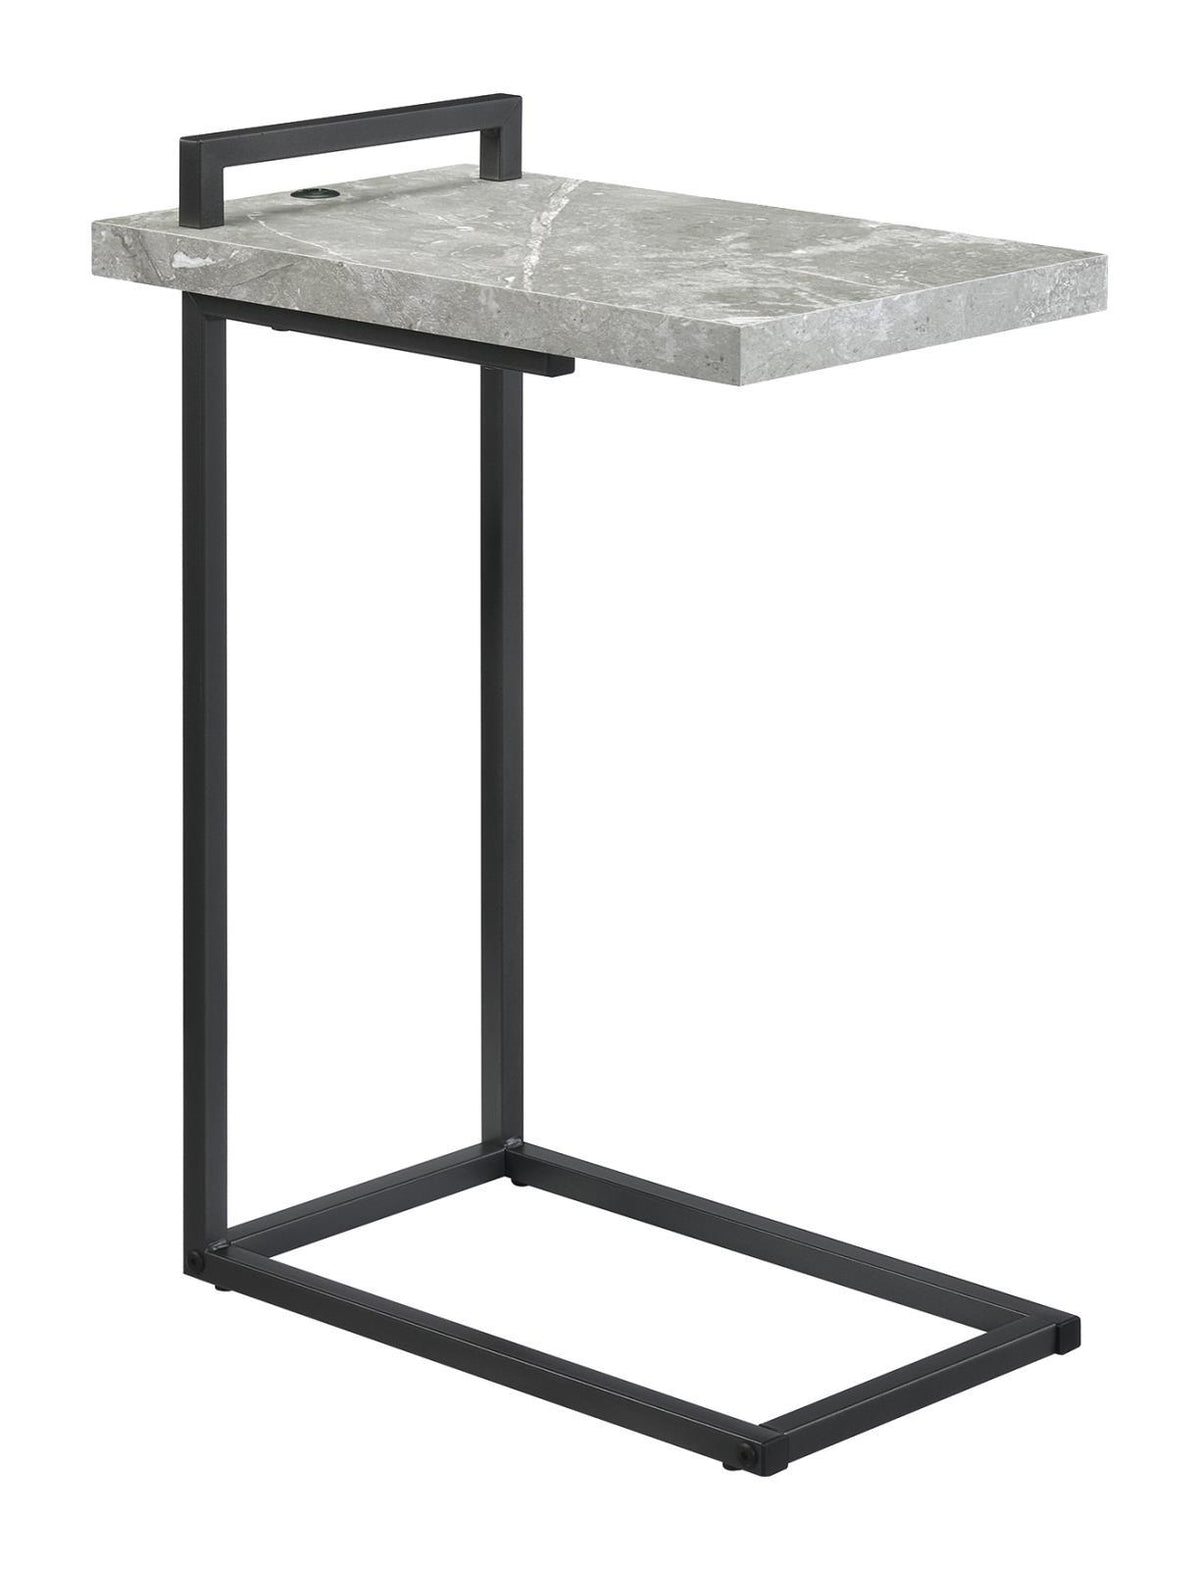 Maxwell C-shaped Accent Table Cement and Gunmetal Maxwell C-shaped Accent Table Cement and Gunmetal Half Price Furniture